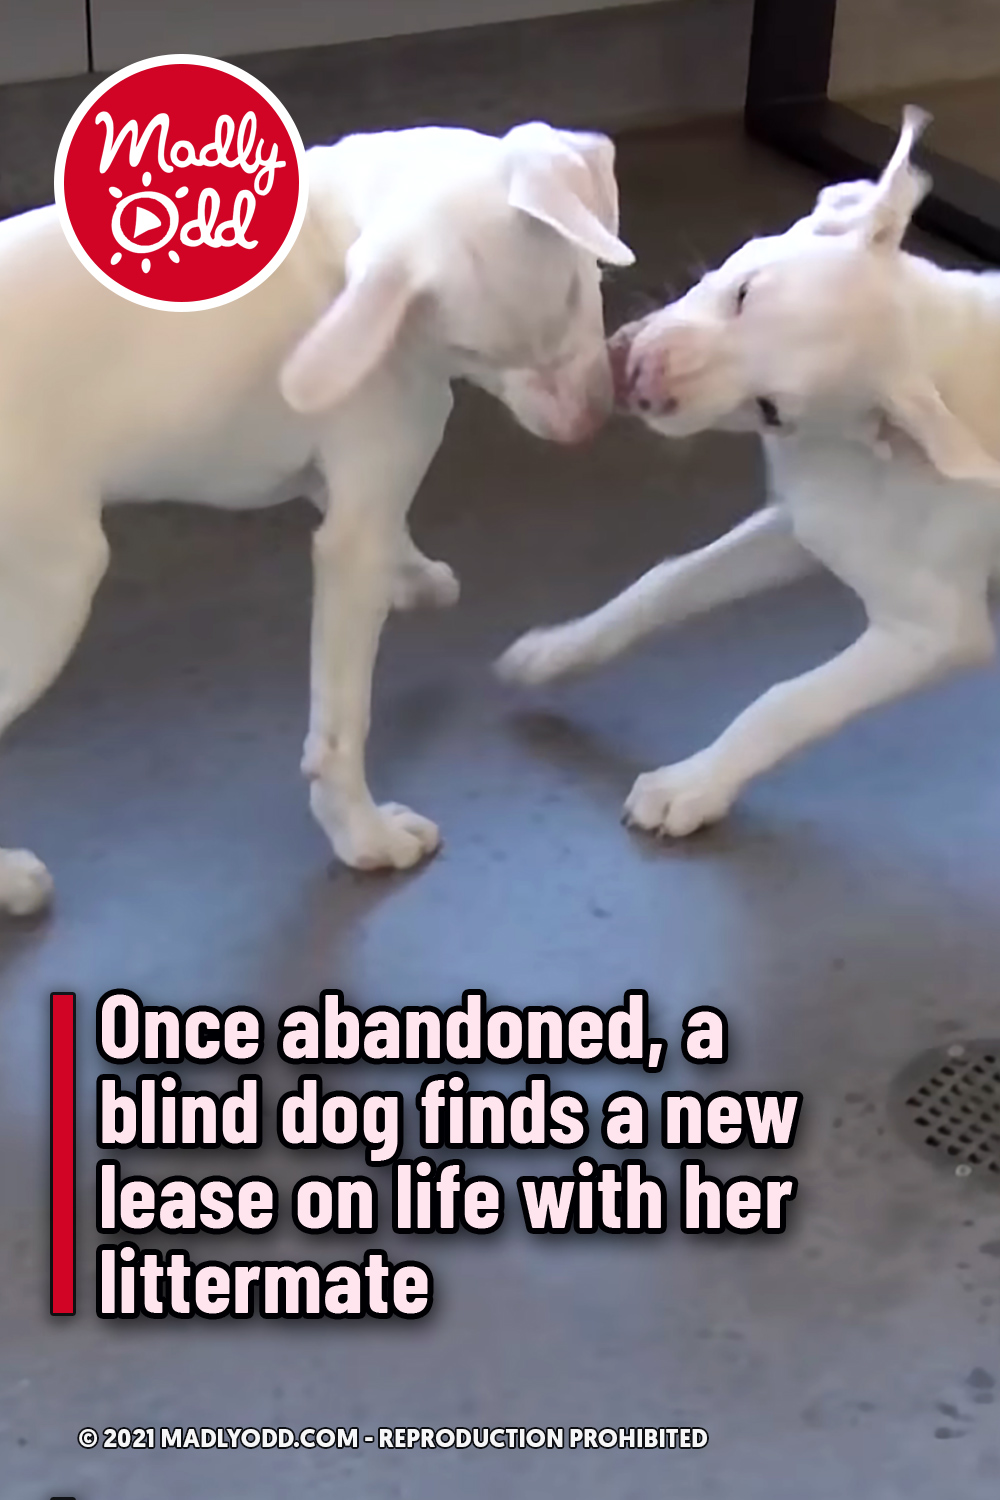 Once abandoned, a blind dog finds a new lease on life with her littermate